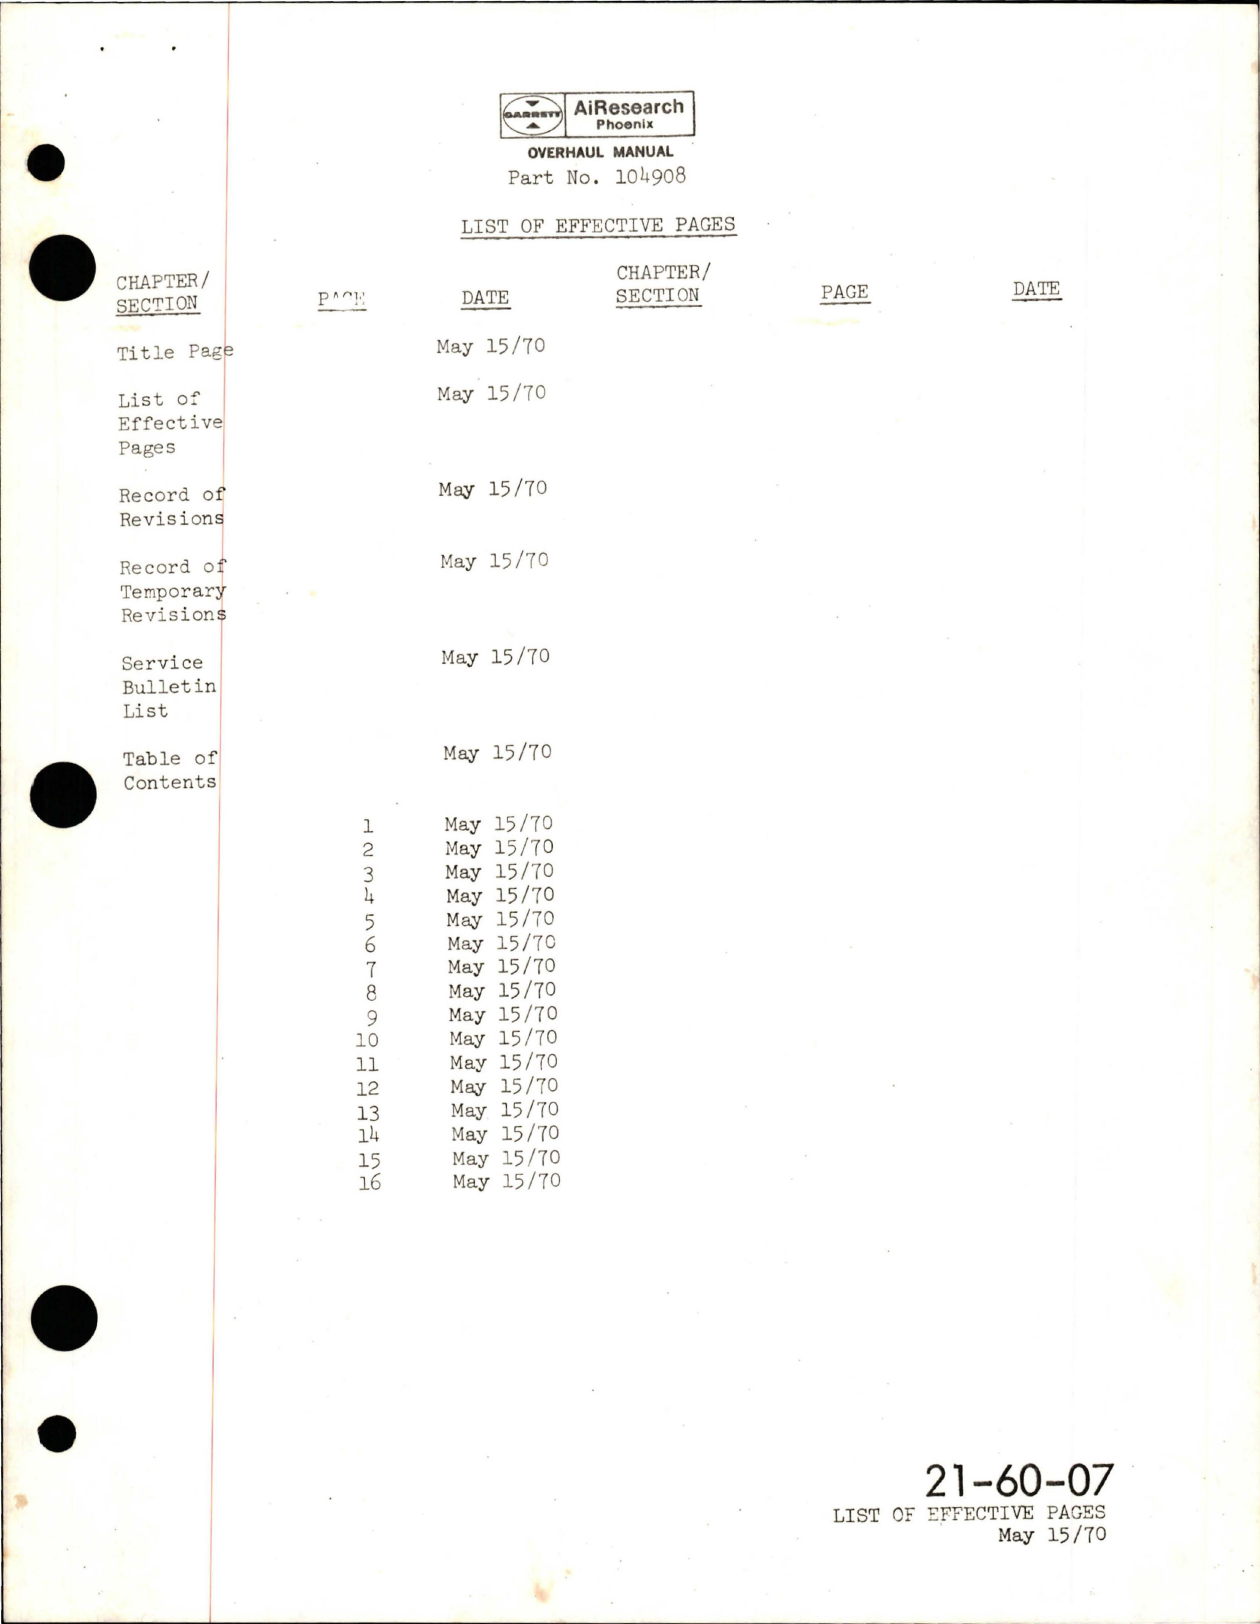 Sample page 5 from AirCorps Library document: Overhaul Manual for Six inch Diameter Electric Shutoff Butterfly Valve - Part 104908